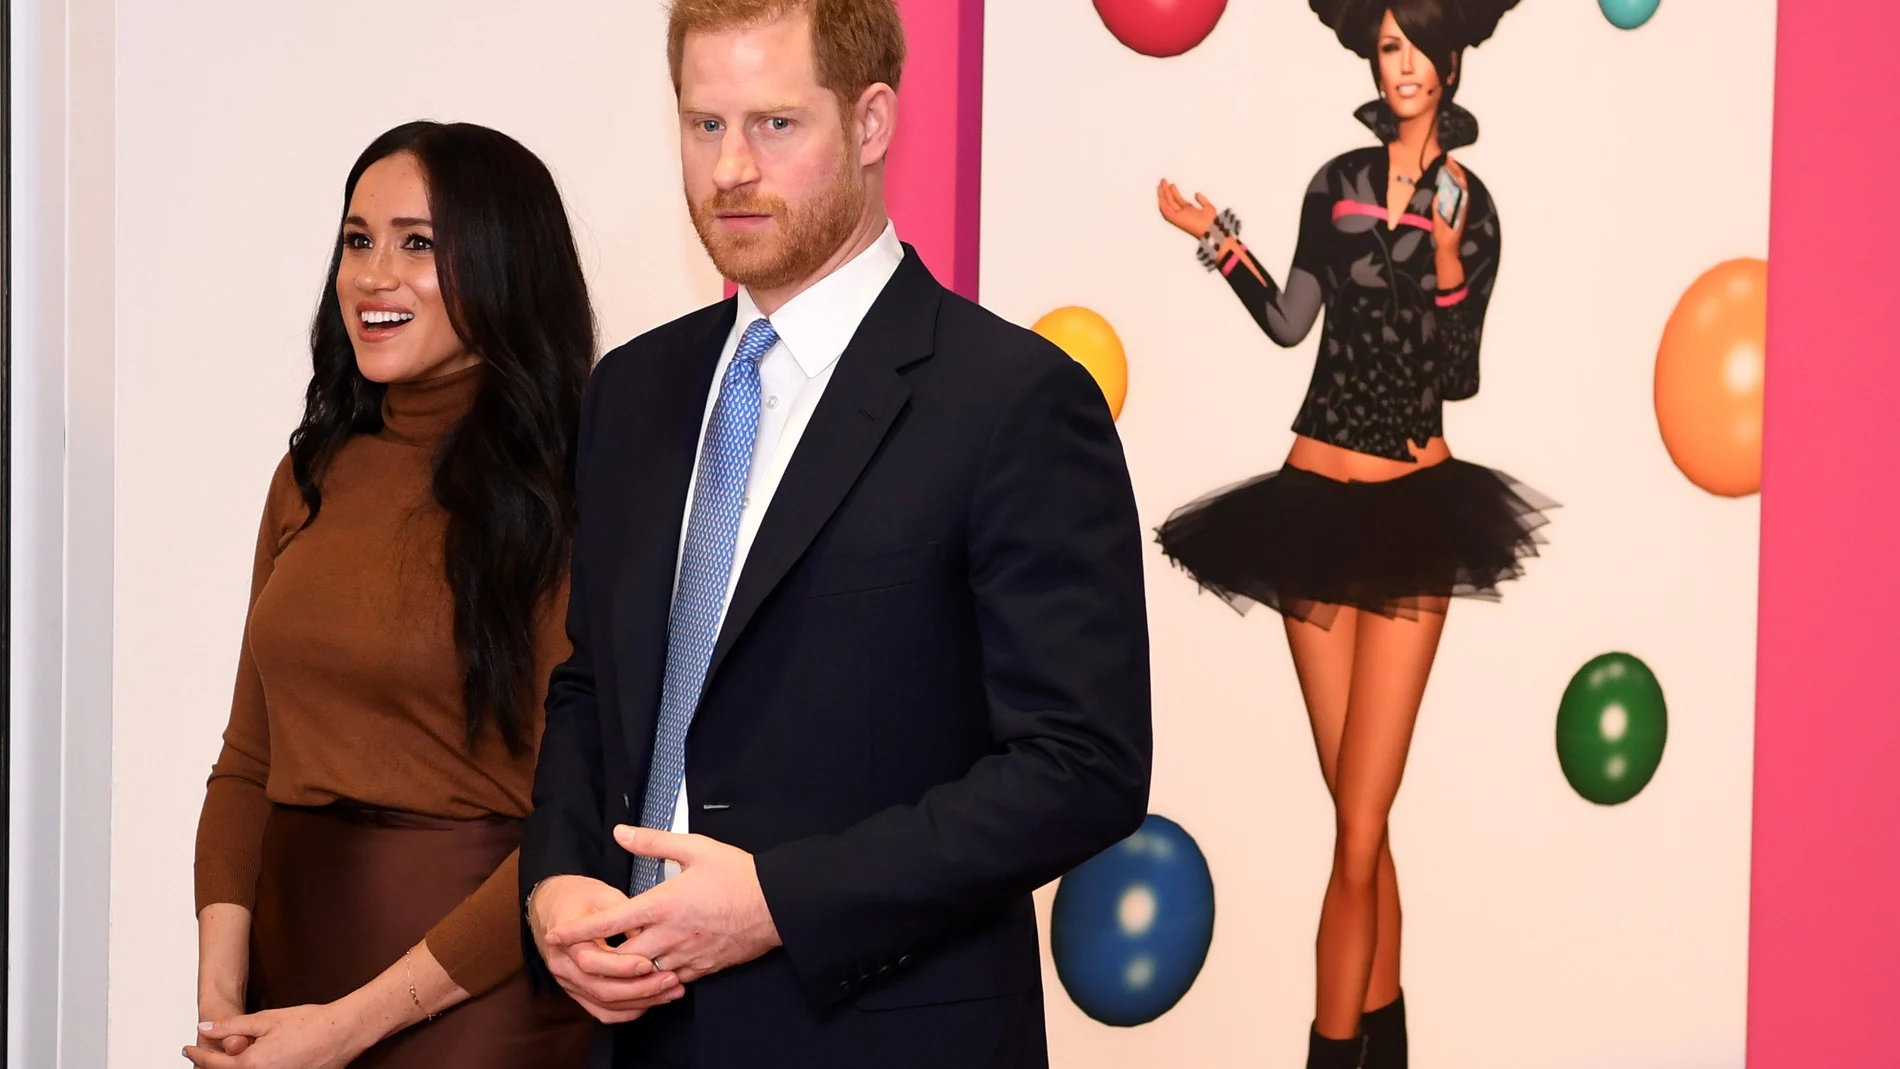 Britain's Prince Harry and his wife Meghan, Duchess of Sussex react as they view a special exhibition of art by Indigenous Canadian artist Skawennati in the Canada Gallery during their visit to Canada House in London, Britain January 7, 2020. Daniel Leal-Olivas/Pool via REUTERS